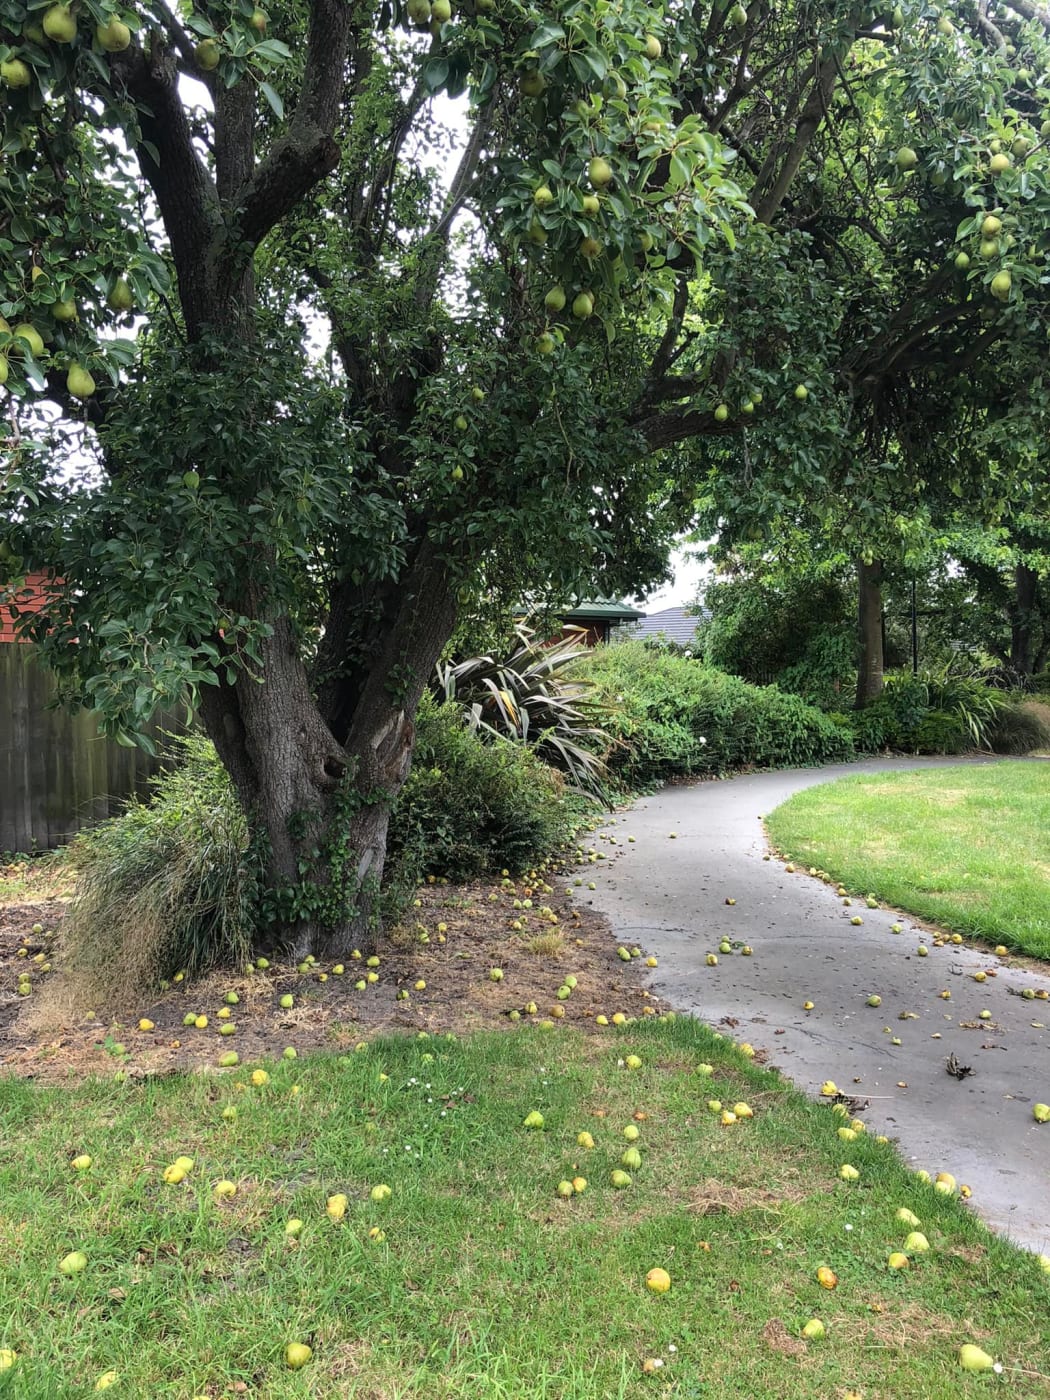 A tree laden with pears near a walkway in the Christchurch suburb of Addington.